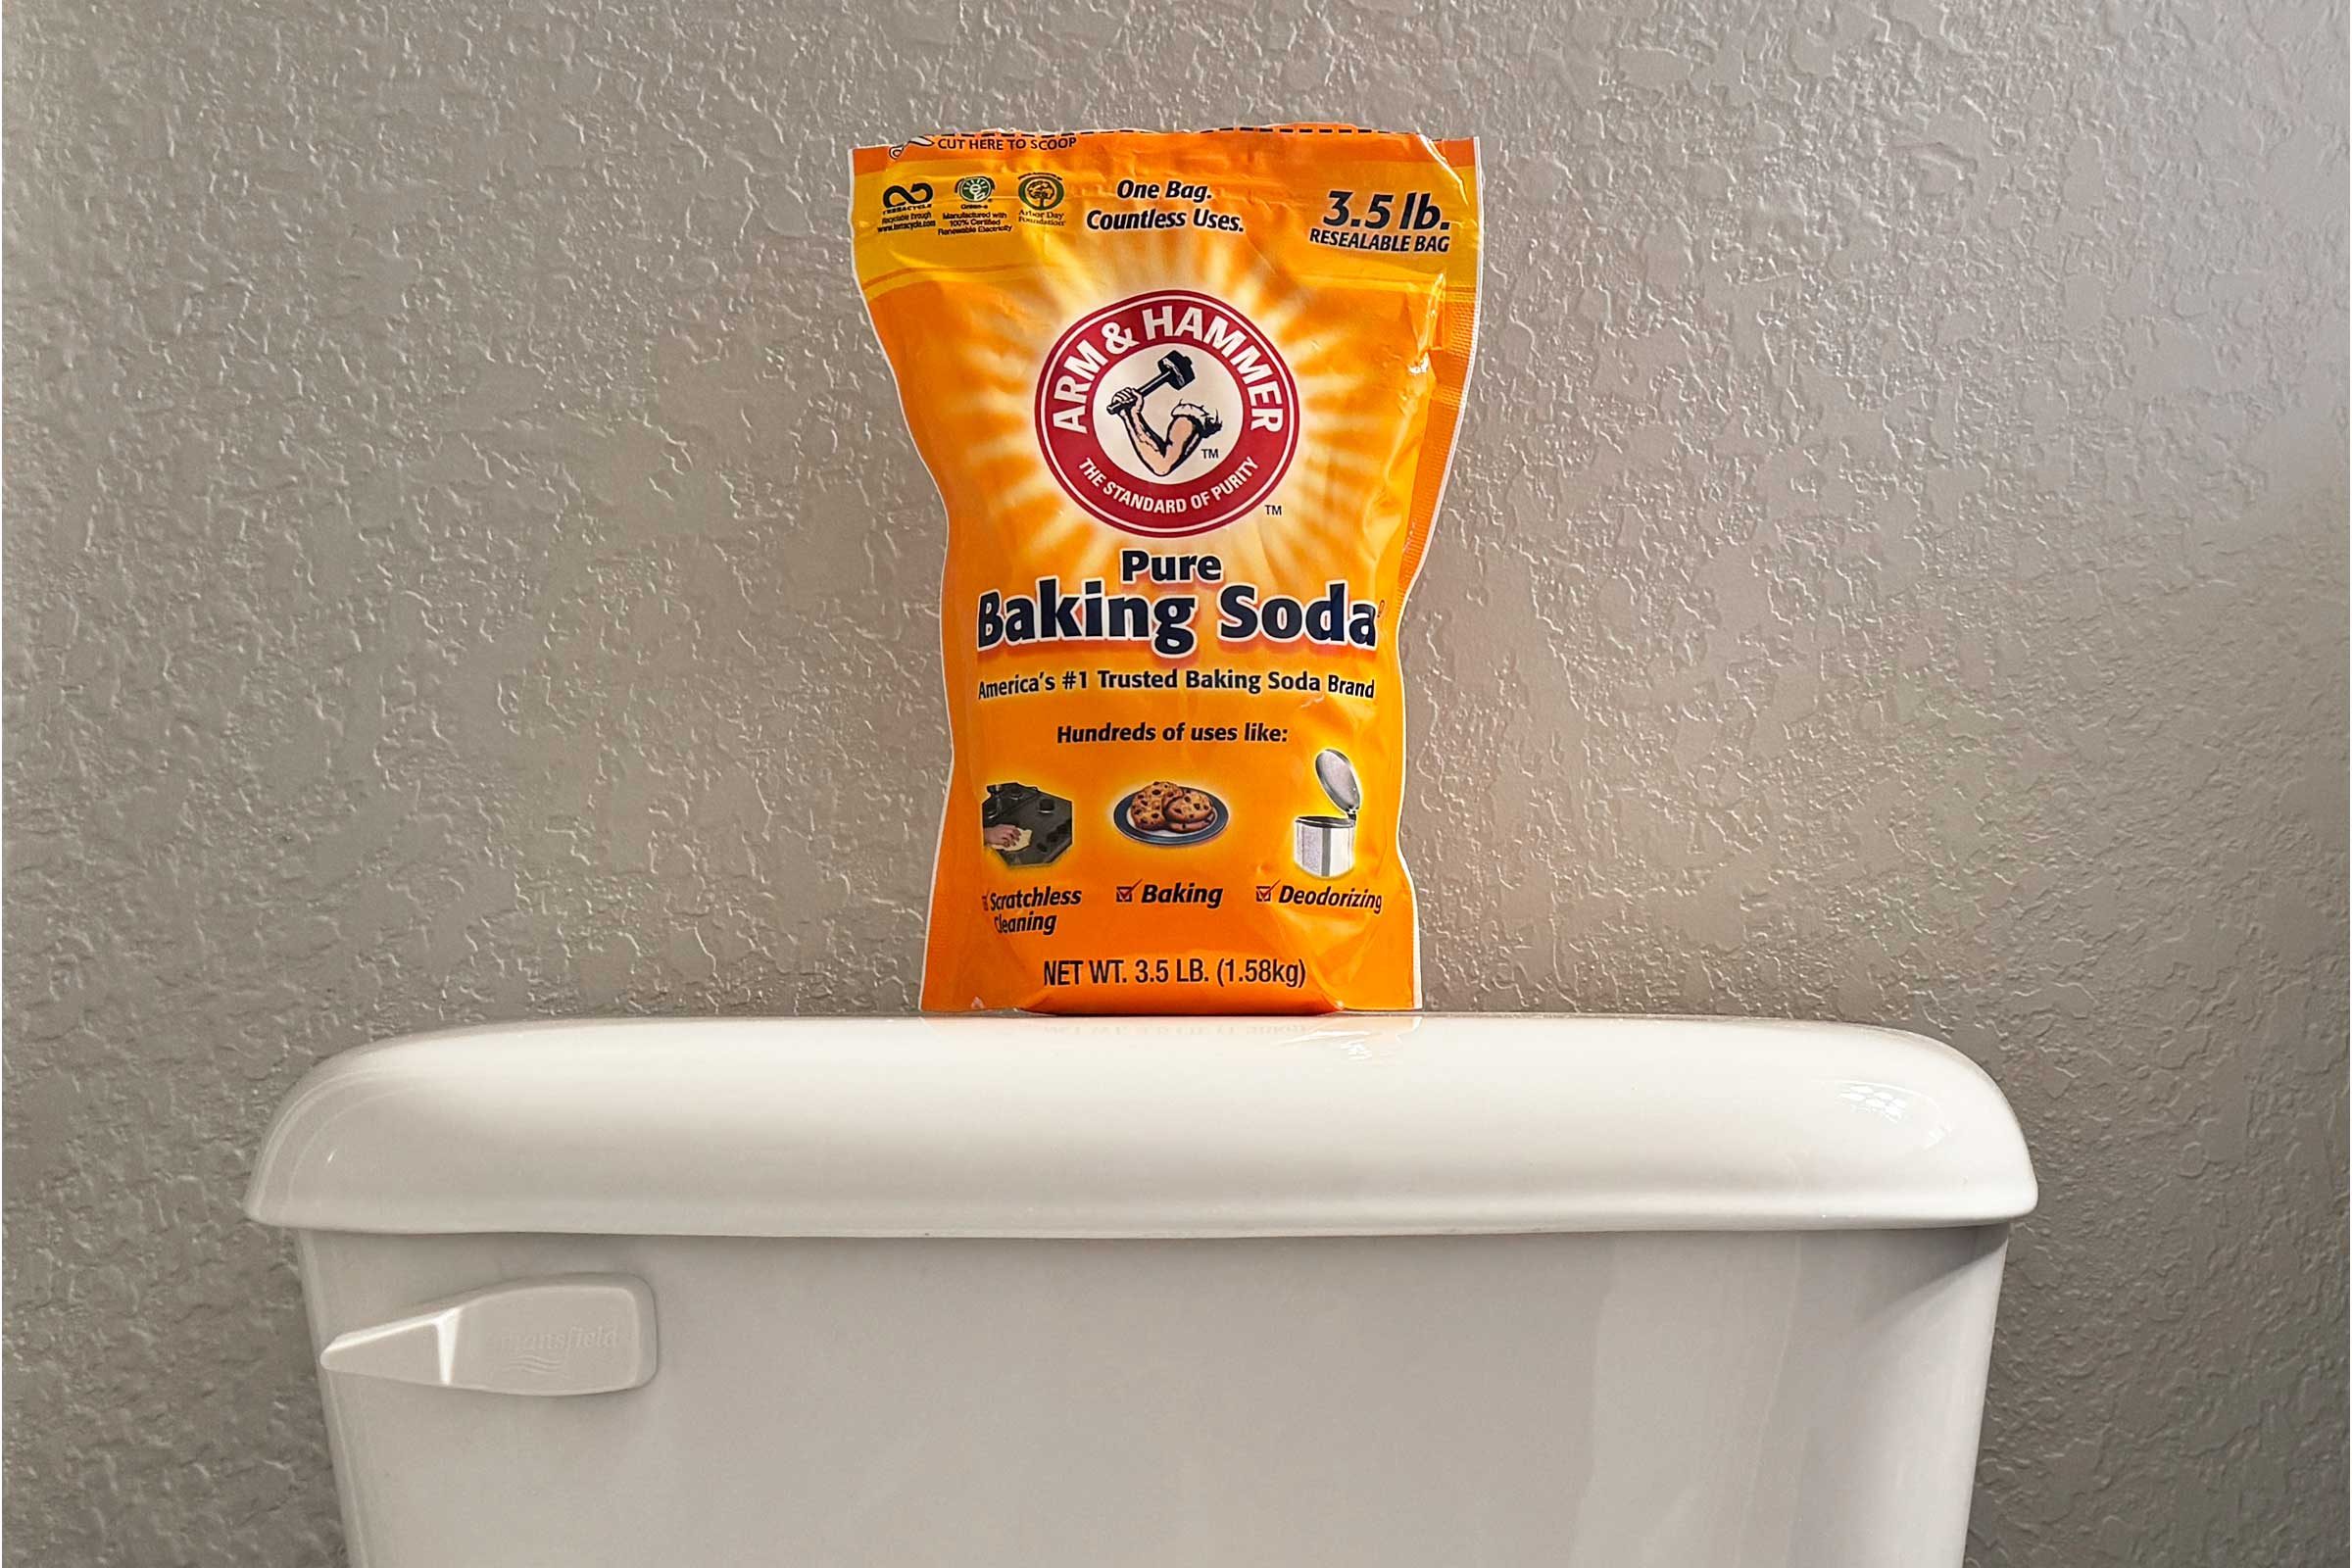 What Happens When You Put Baking Soda in a Toilet Tank?